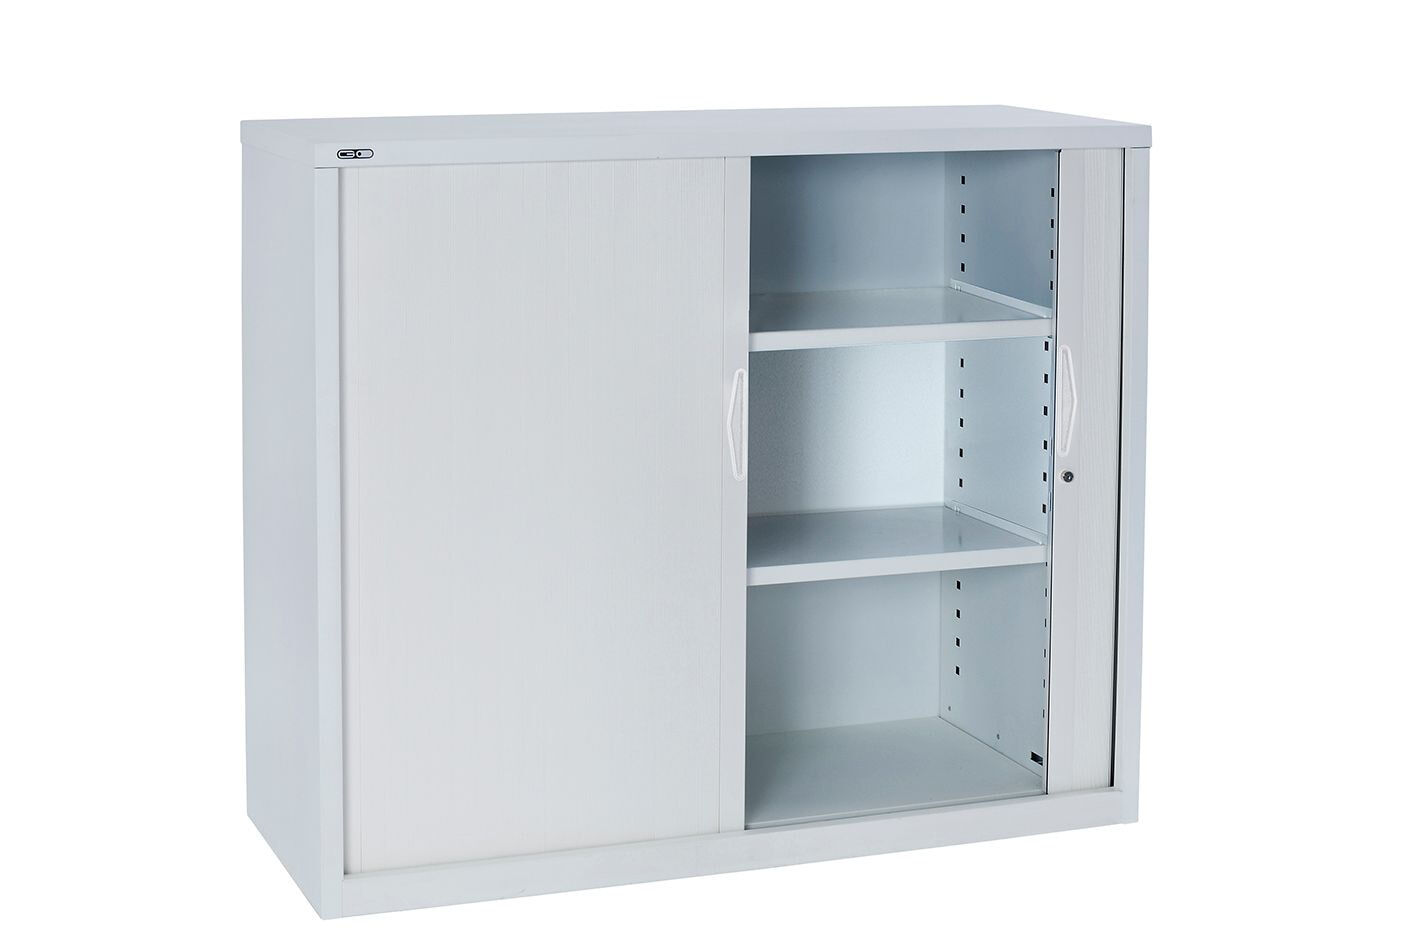 1015H x 900W x 473D (2 shelves included)